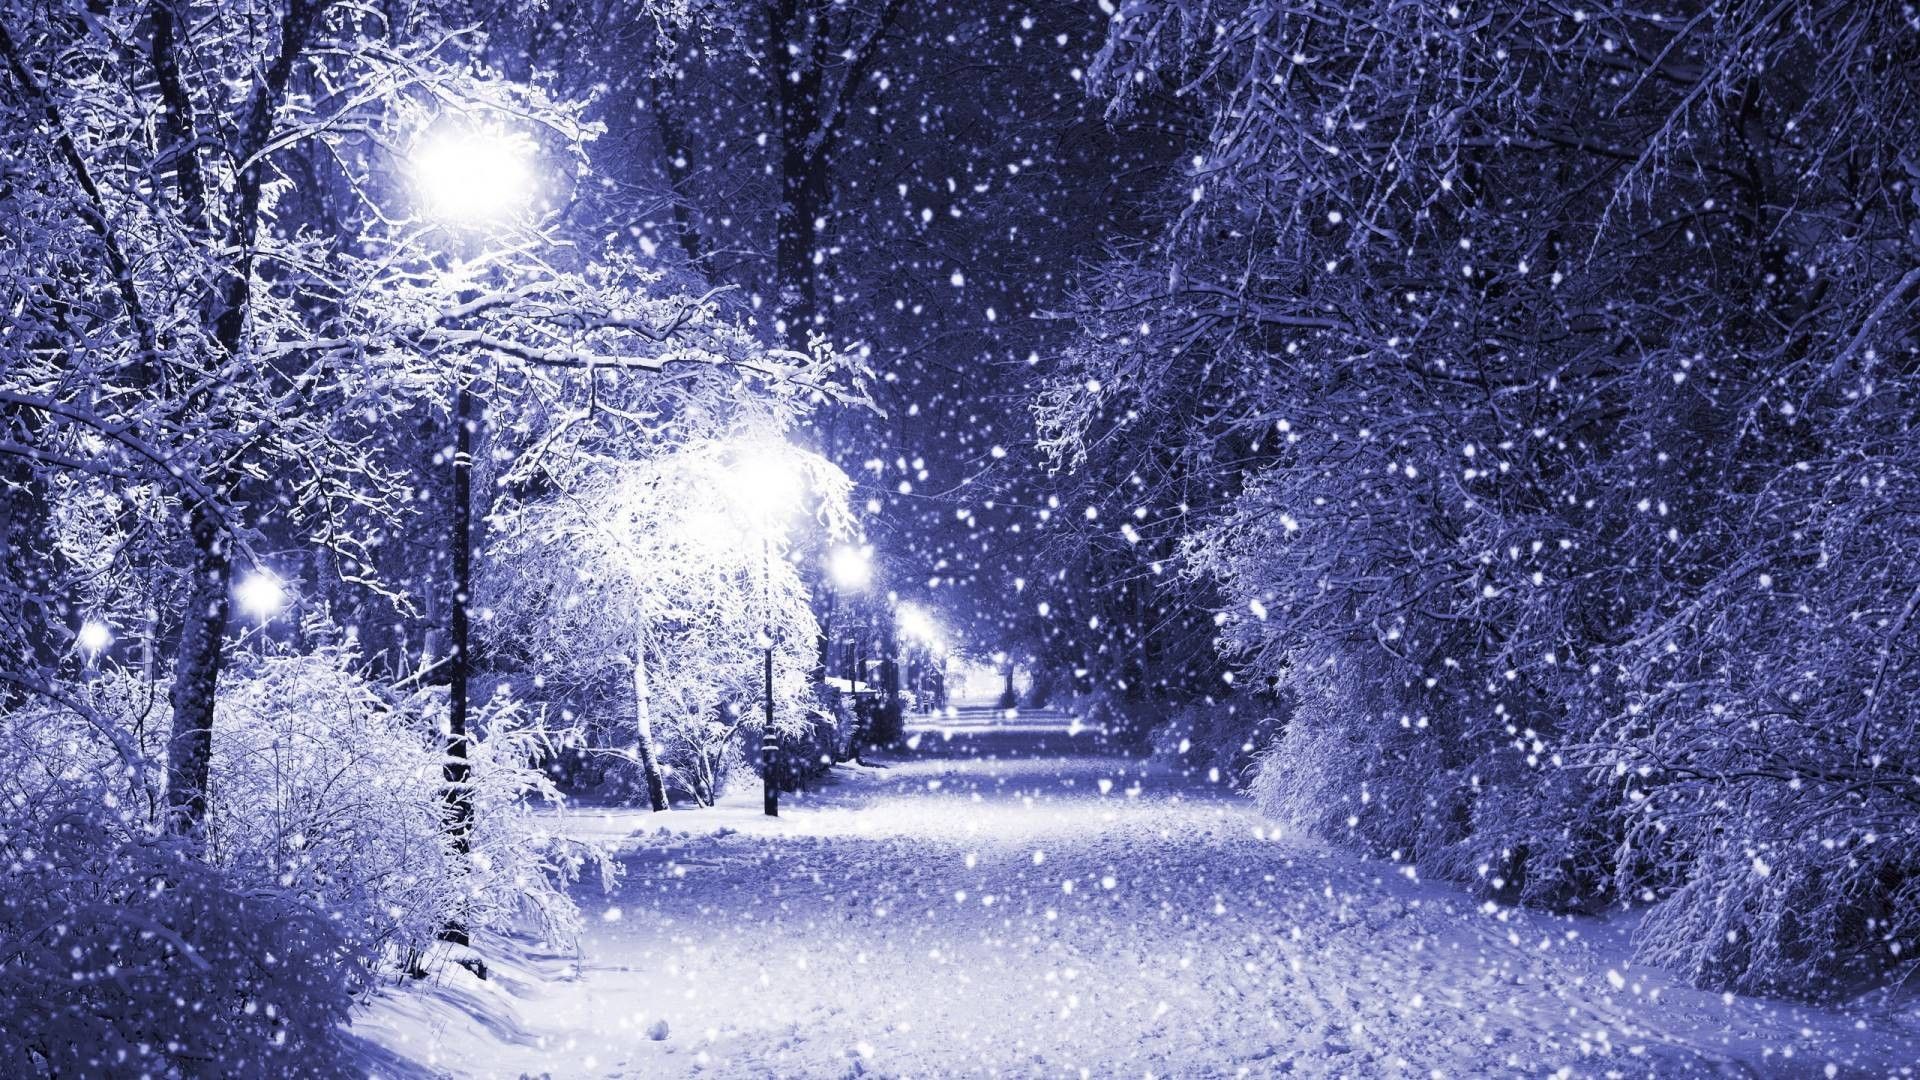 Snow Fall Wallpaper Free Snow Fall Background